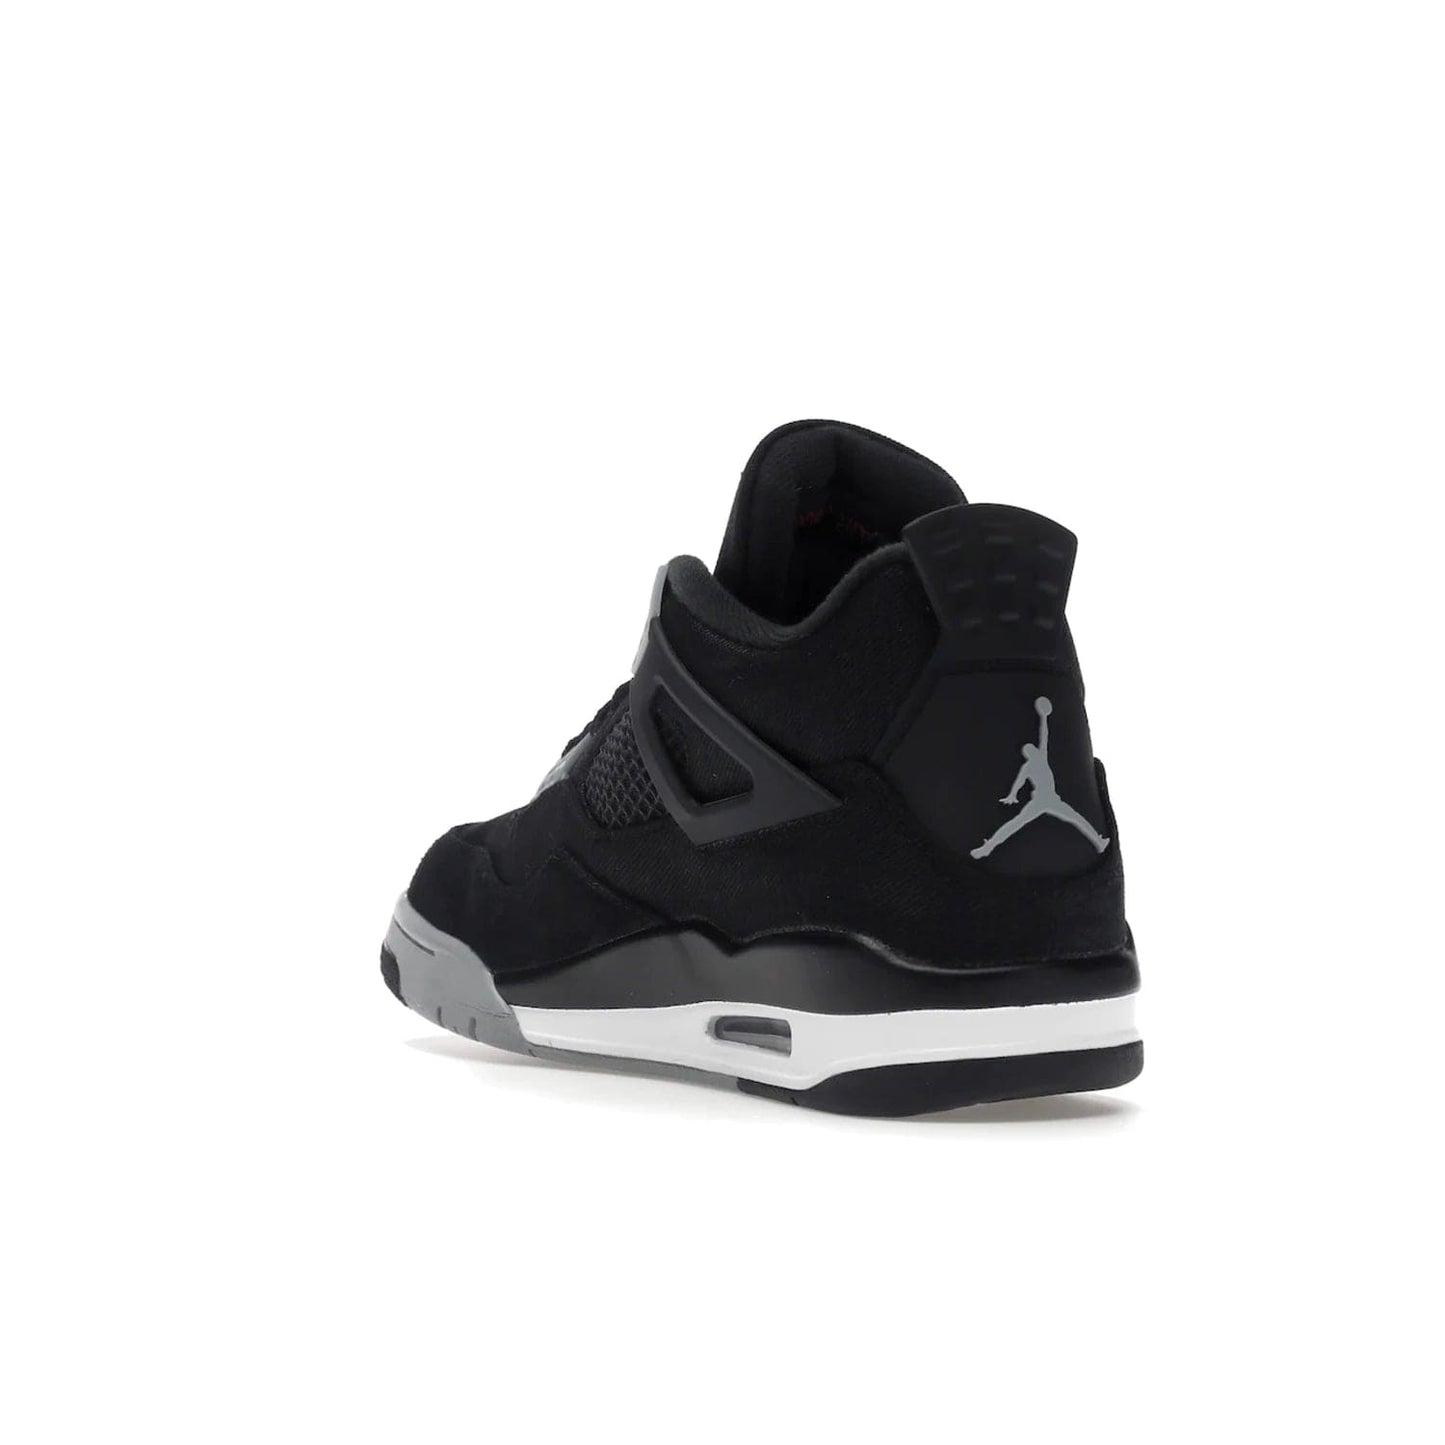 Jordan 4 Retro SE Black Canvas - Image 25 - Only at www.BallersClubKickz.com - The Air Jordan 4 Retro SE Black Canvas brings timeless style and modern luxury. Classic mid-top sneaker in black canvas and grey suede with tonal Jumpman logo, Flight logo and polyurethane midsole with visible Air-sole cushioning. Refresh your sneaker collection and rock the Air Jordan 4 Retro SE Black Canvas.